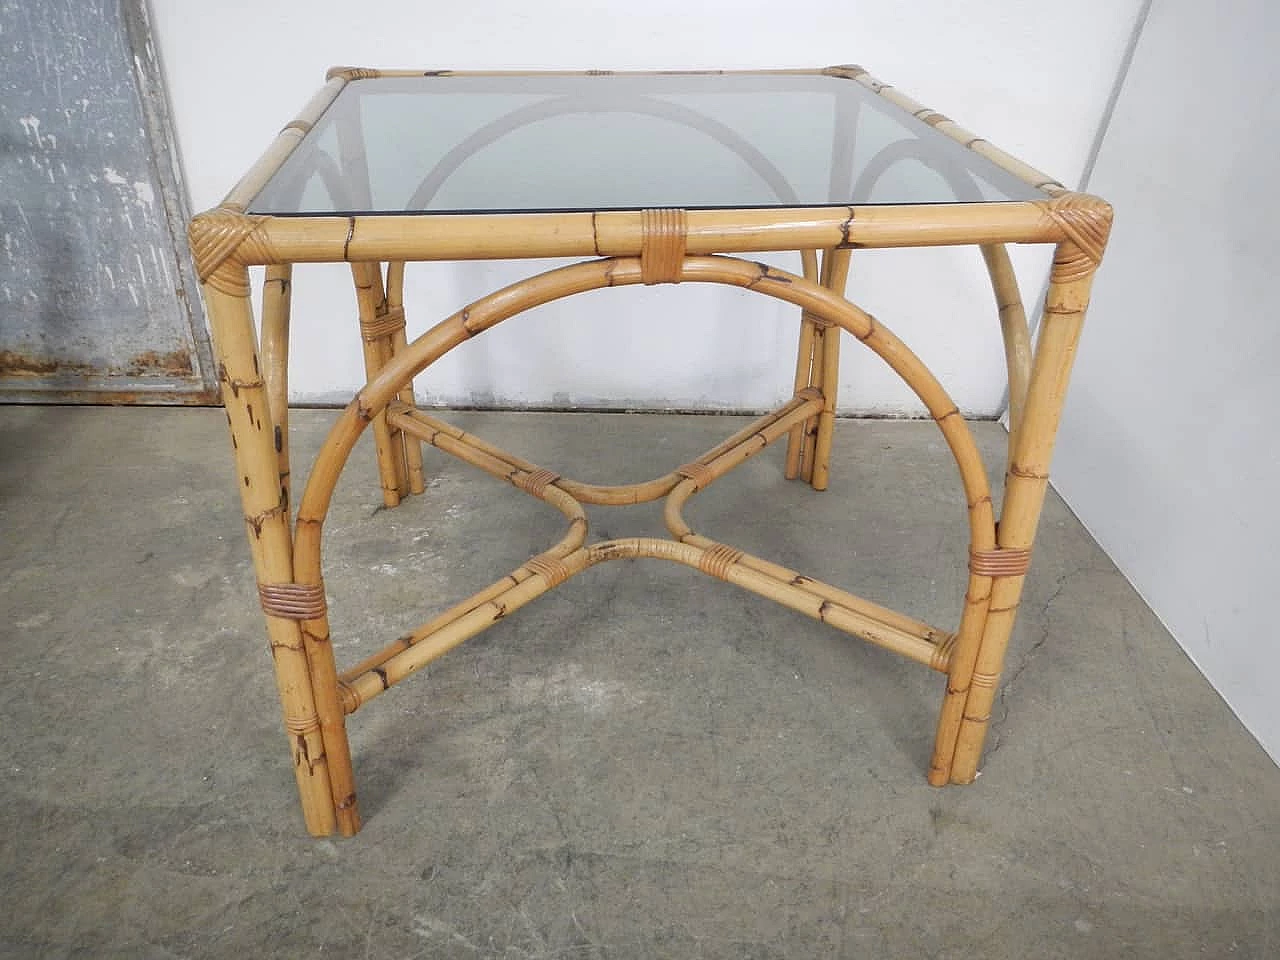 Wicker table with glass top, 1970s 1180658